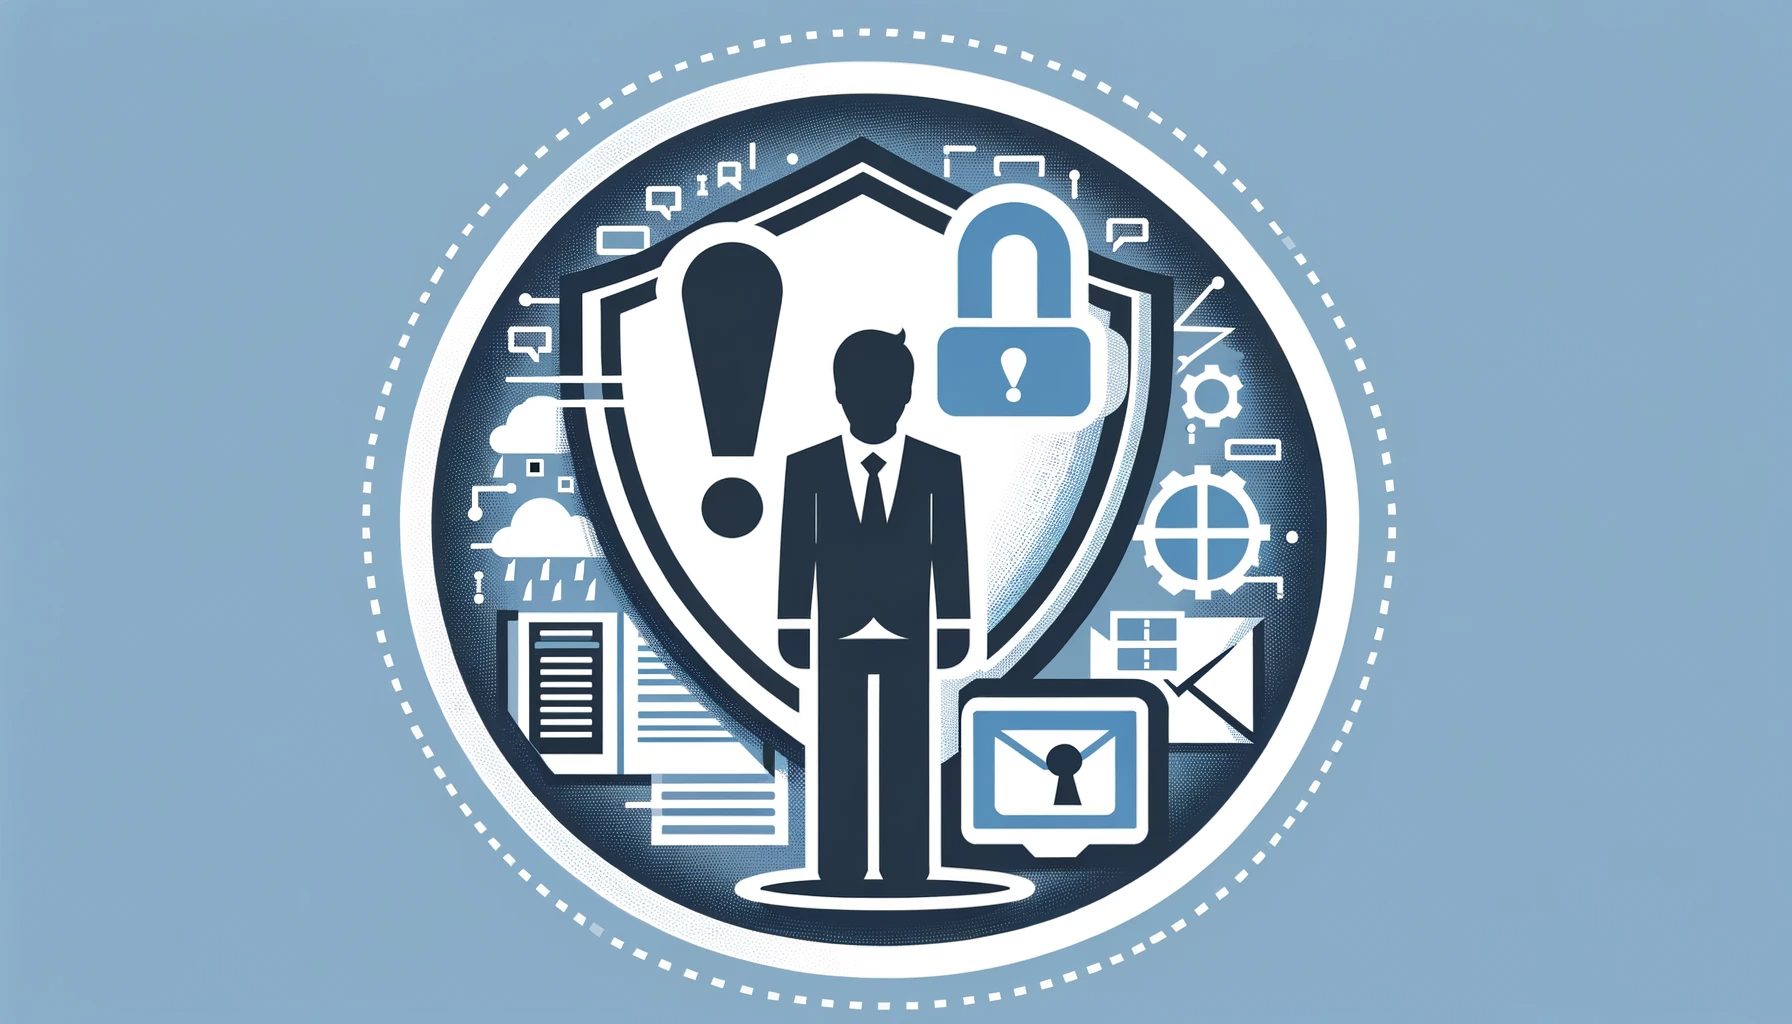 A simple image representing a company complying with the revised Personal Information Protection Law. The background prominently features a warning symbol, an exclamation mark, to emphasize the seriousness of data breaches. The design should subtly incorporate elements that symbolize privacy protection, such as a shield or a lock, integrated with a corporate environment. The color scheme should be professional, using shades of blue and grey to convey a sense of security and responsibility.